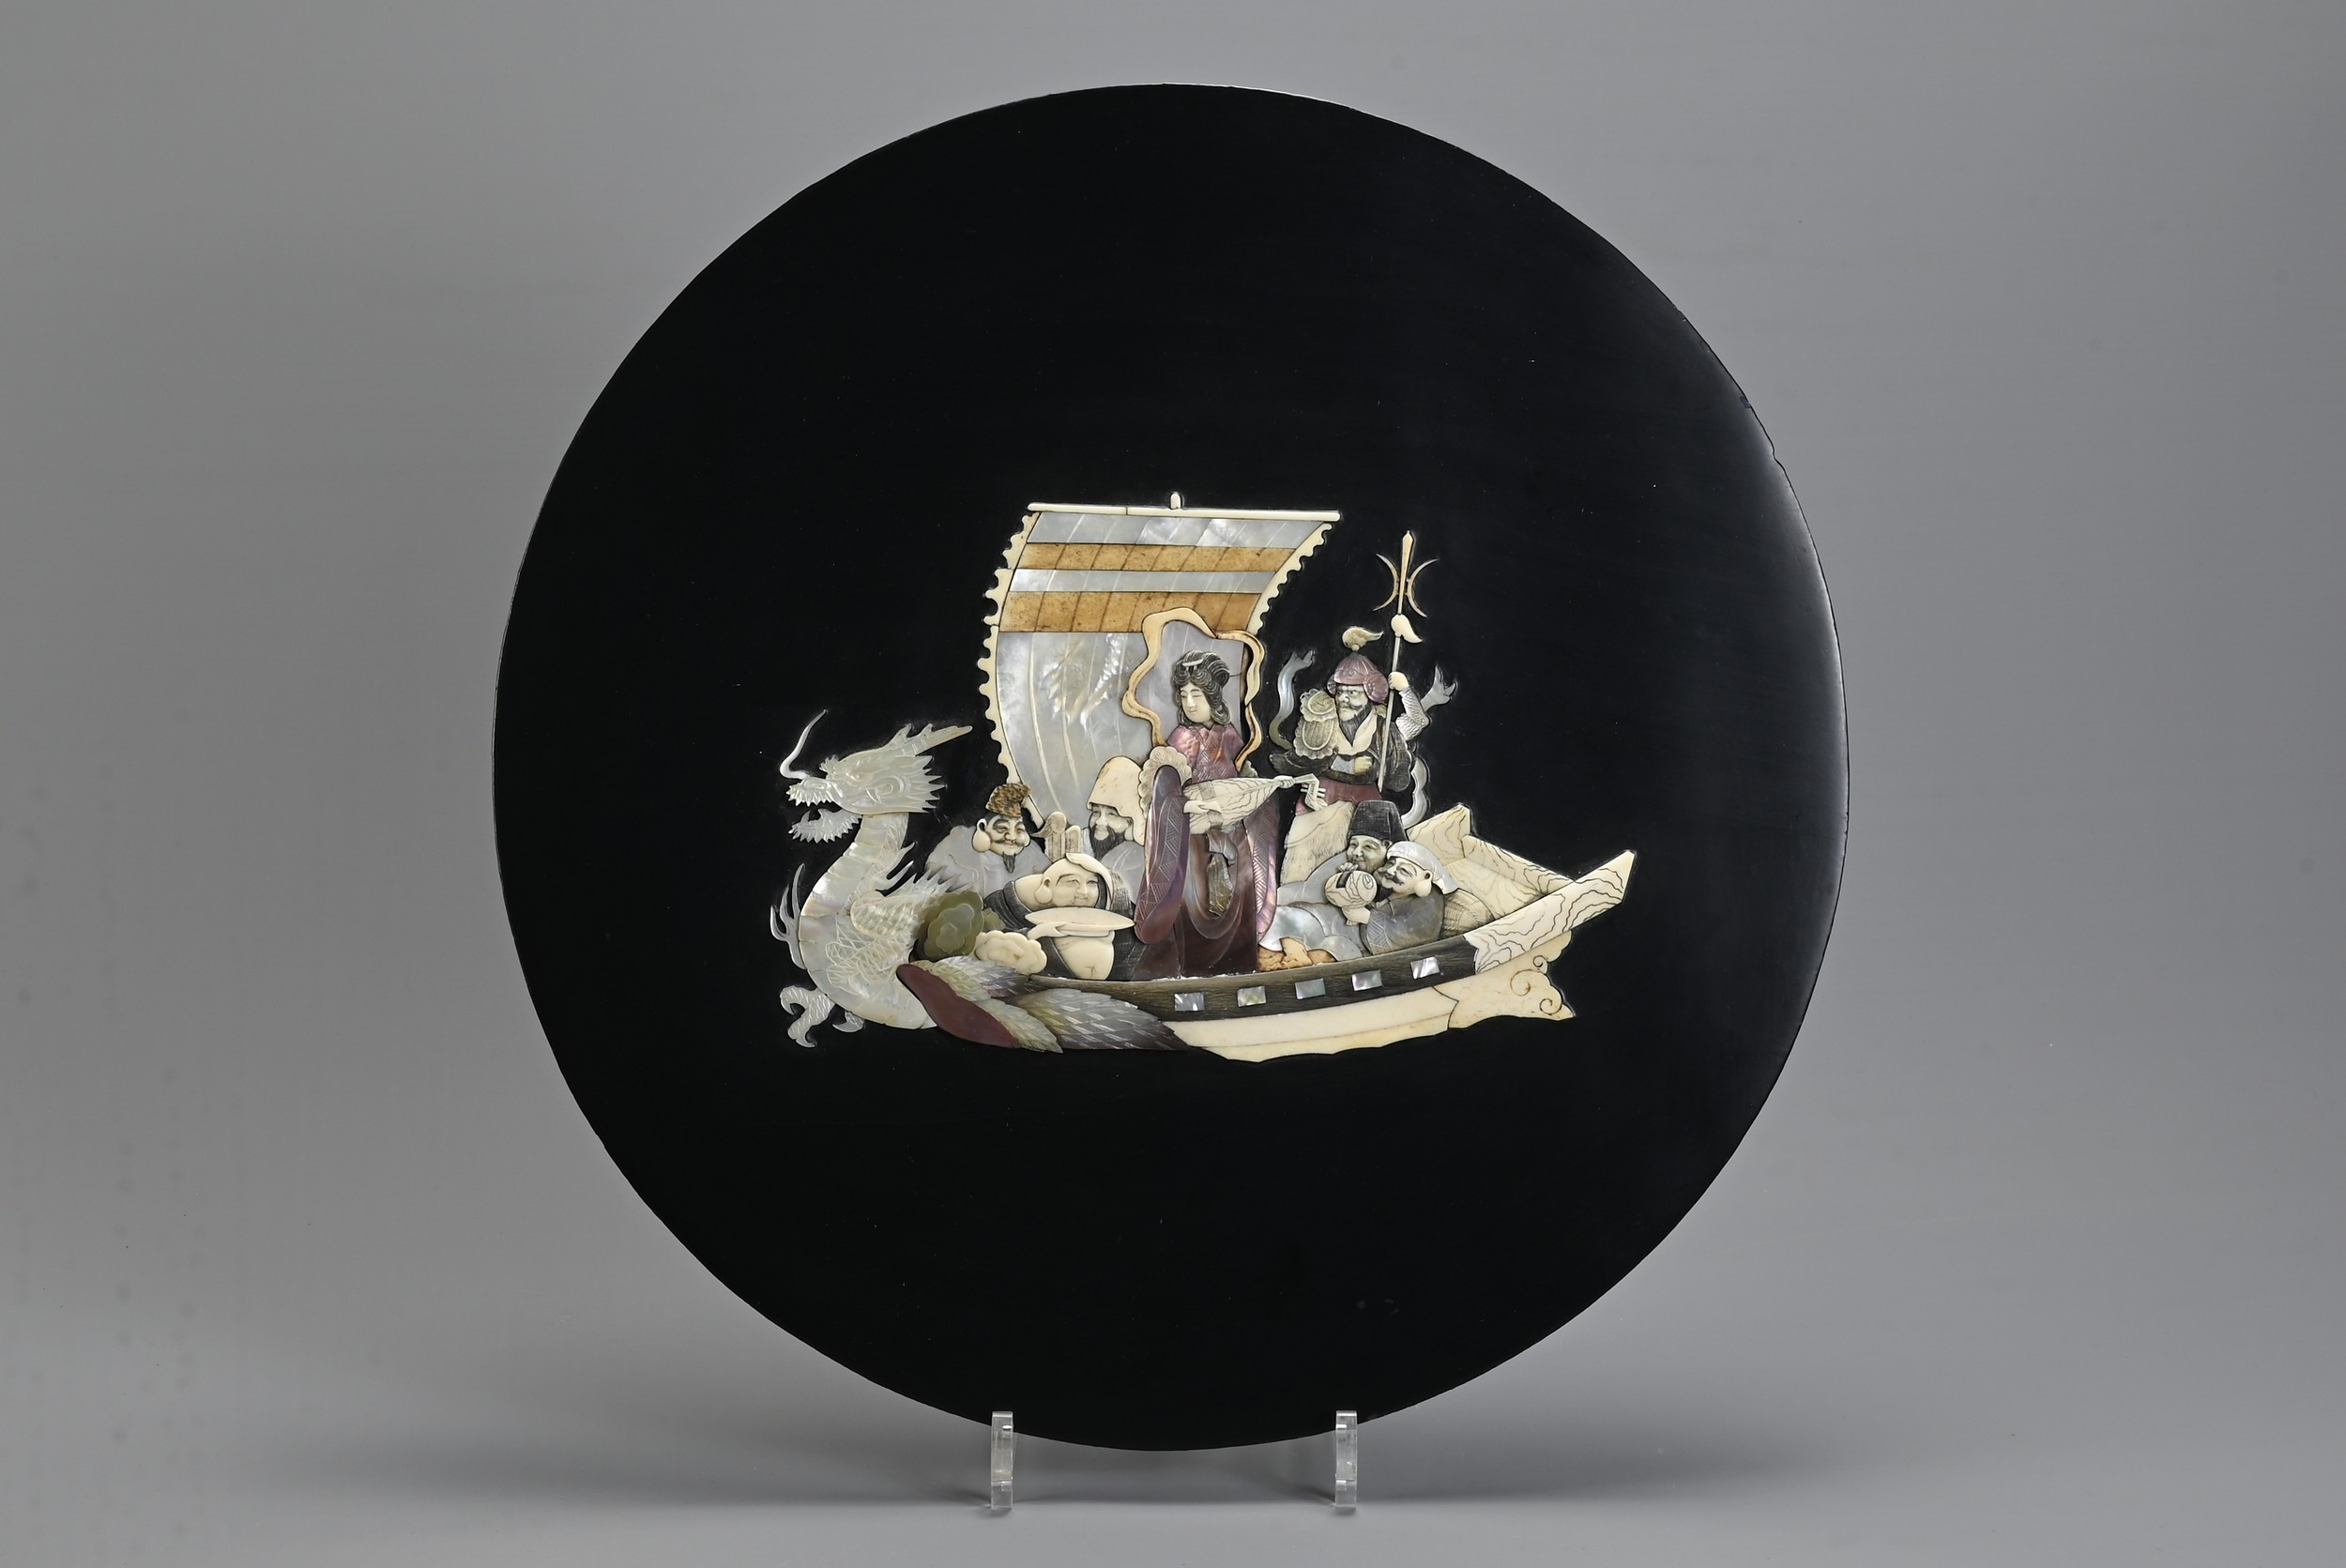 A JAPANESE MEIJI PERIOD (1868-1912) SHIBAYAMA PLAQUE OR COVER. Depicting Seven Lucky Gods on their